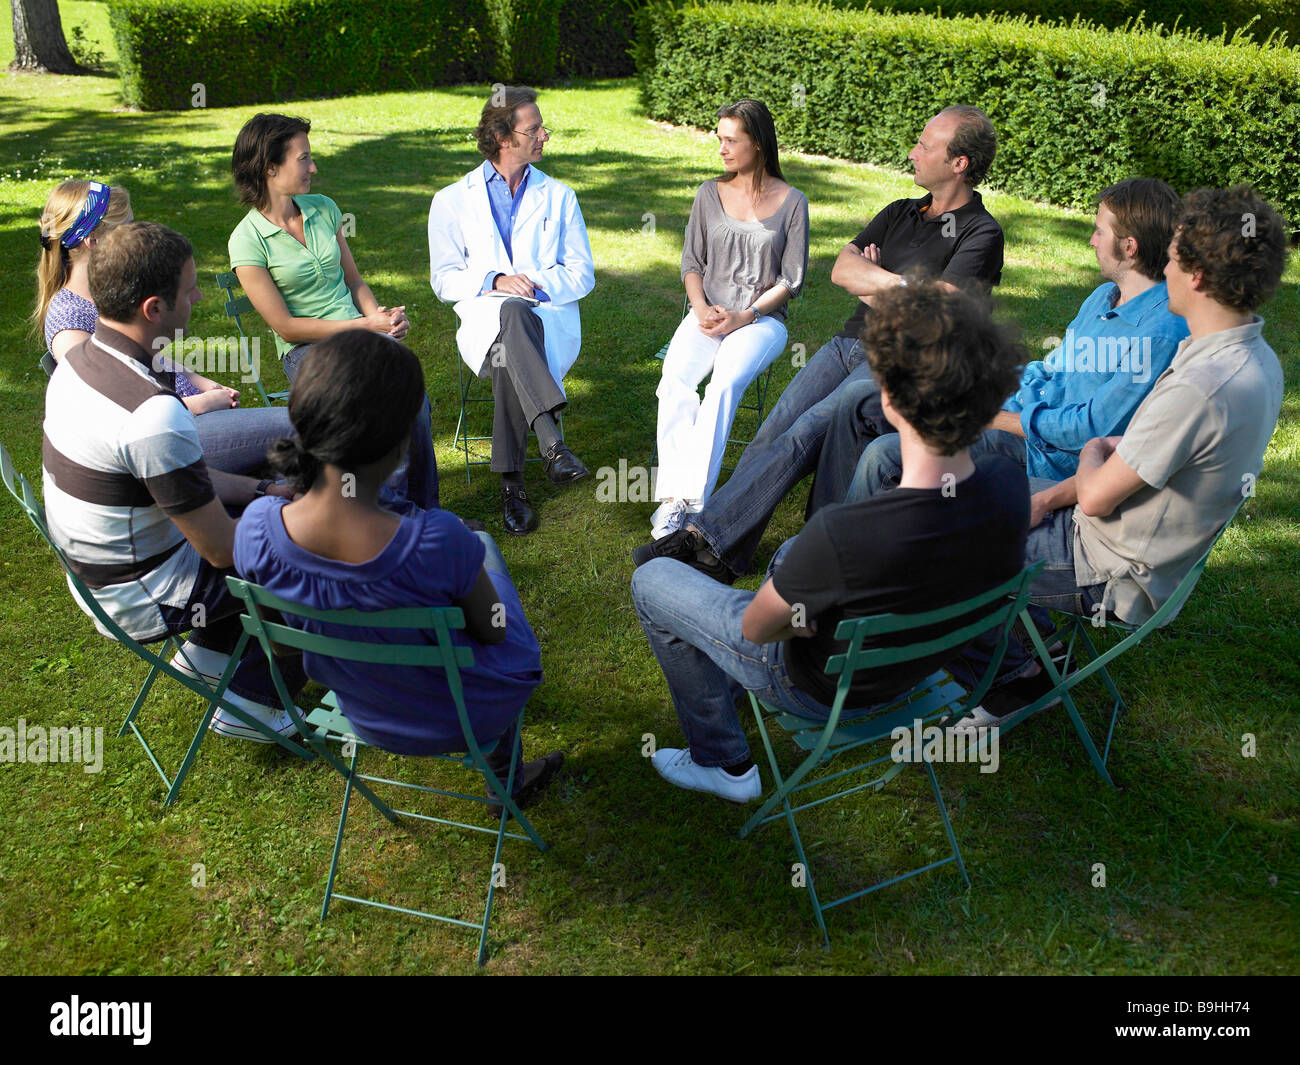 People in rehab,  outdoors Stock Photo